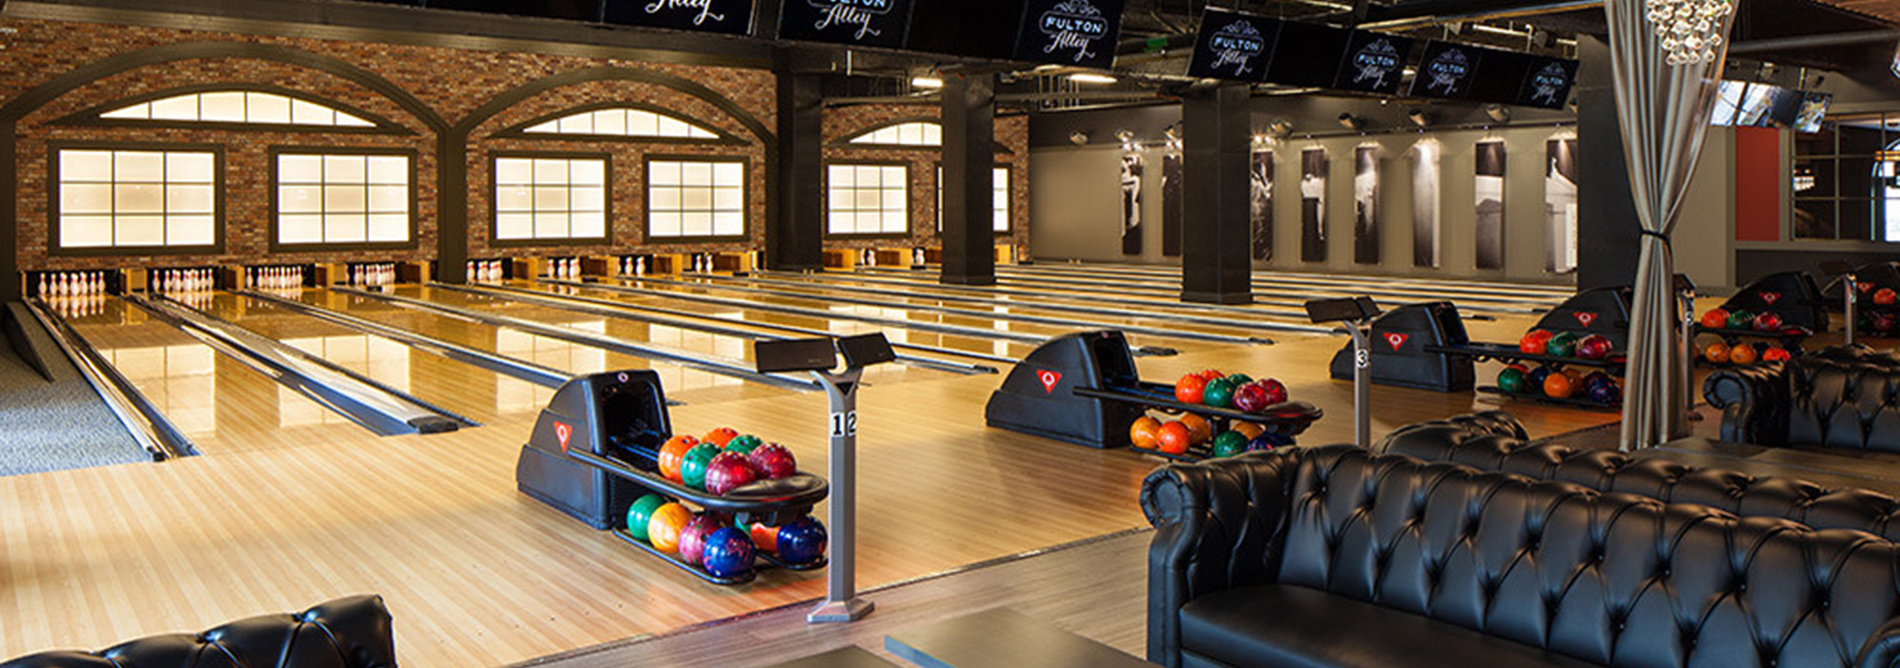 QUBICAAMF-bowling-boutique-Fulton-Alley-banner.jpg